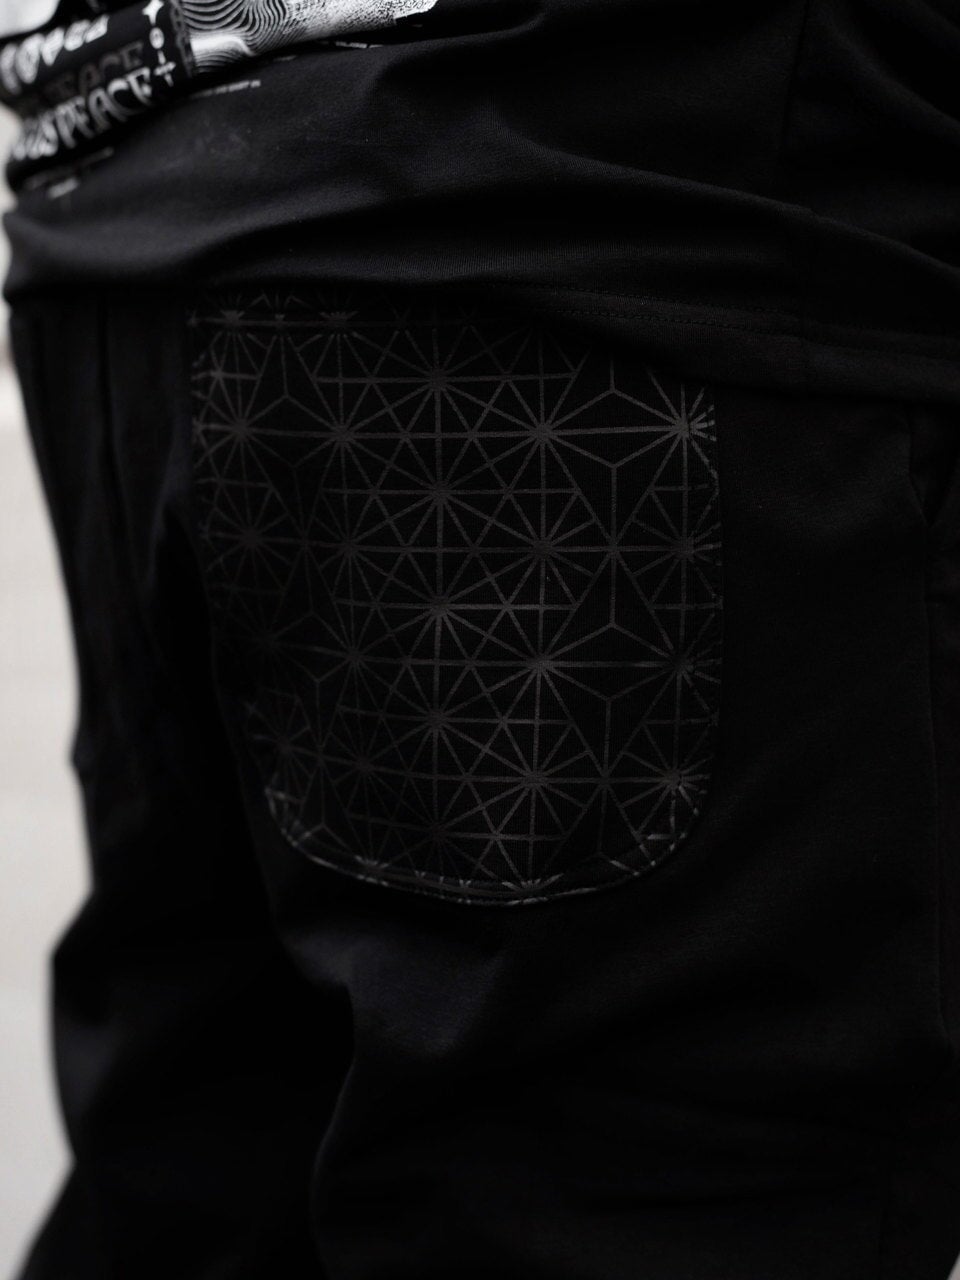 NEW RELEASE ✦ CONVENE WITH THE ELEMENTS ✦ Premium Unisex Joggers Joggers 